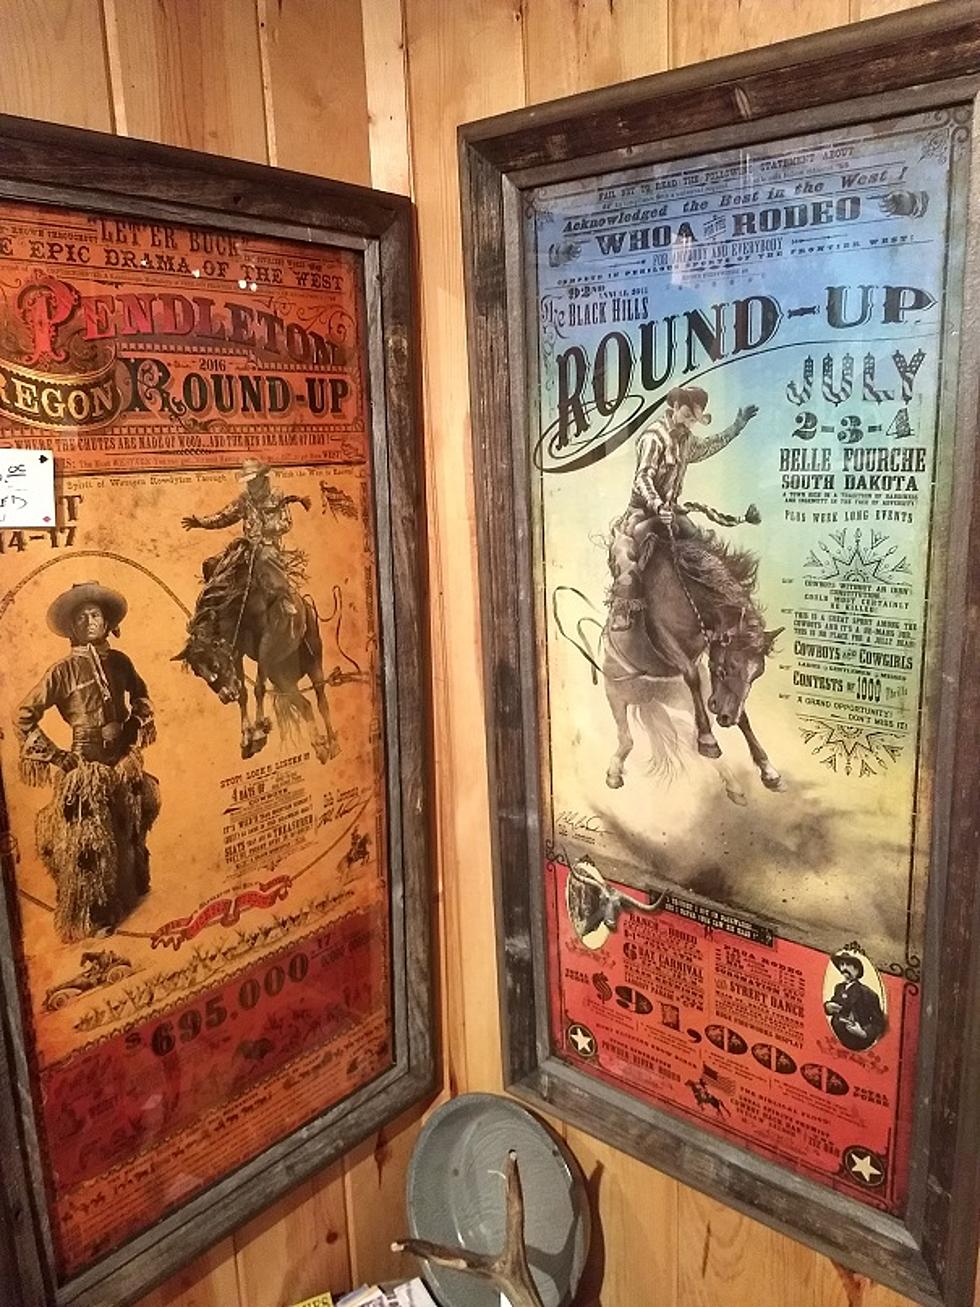 Meet The Artist Of These Iconic Wyoming Posters